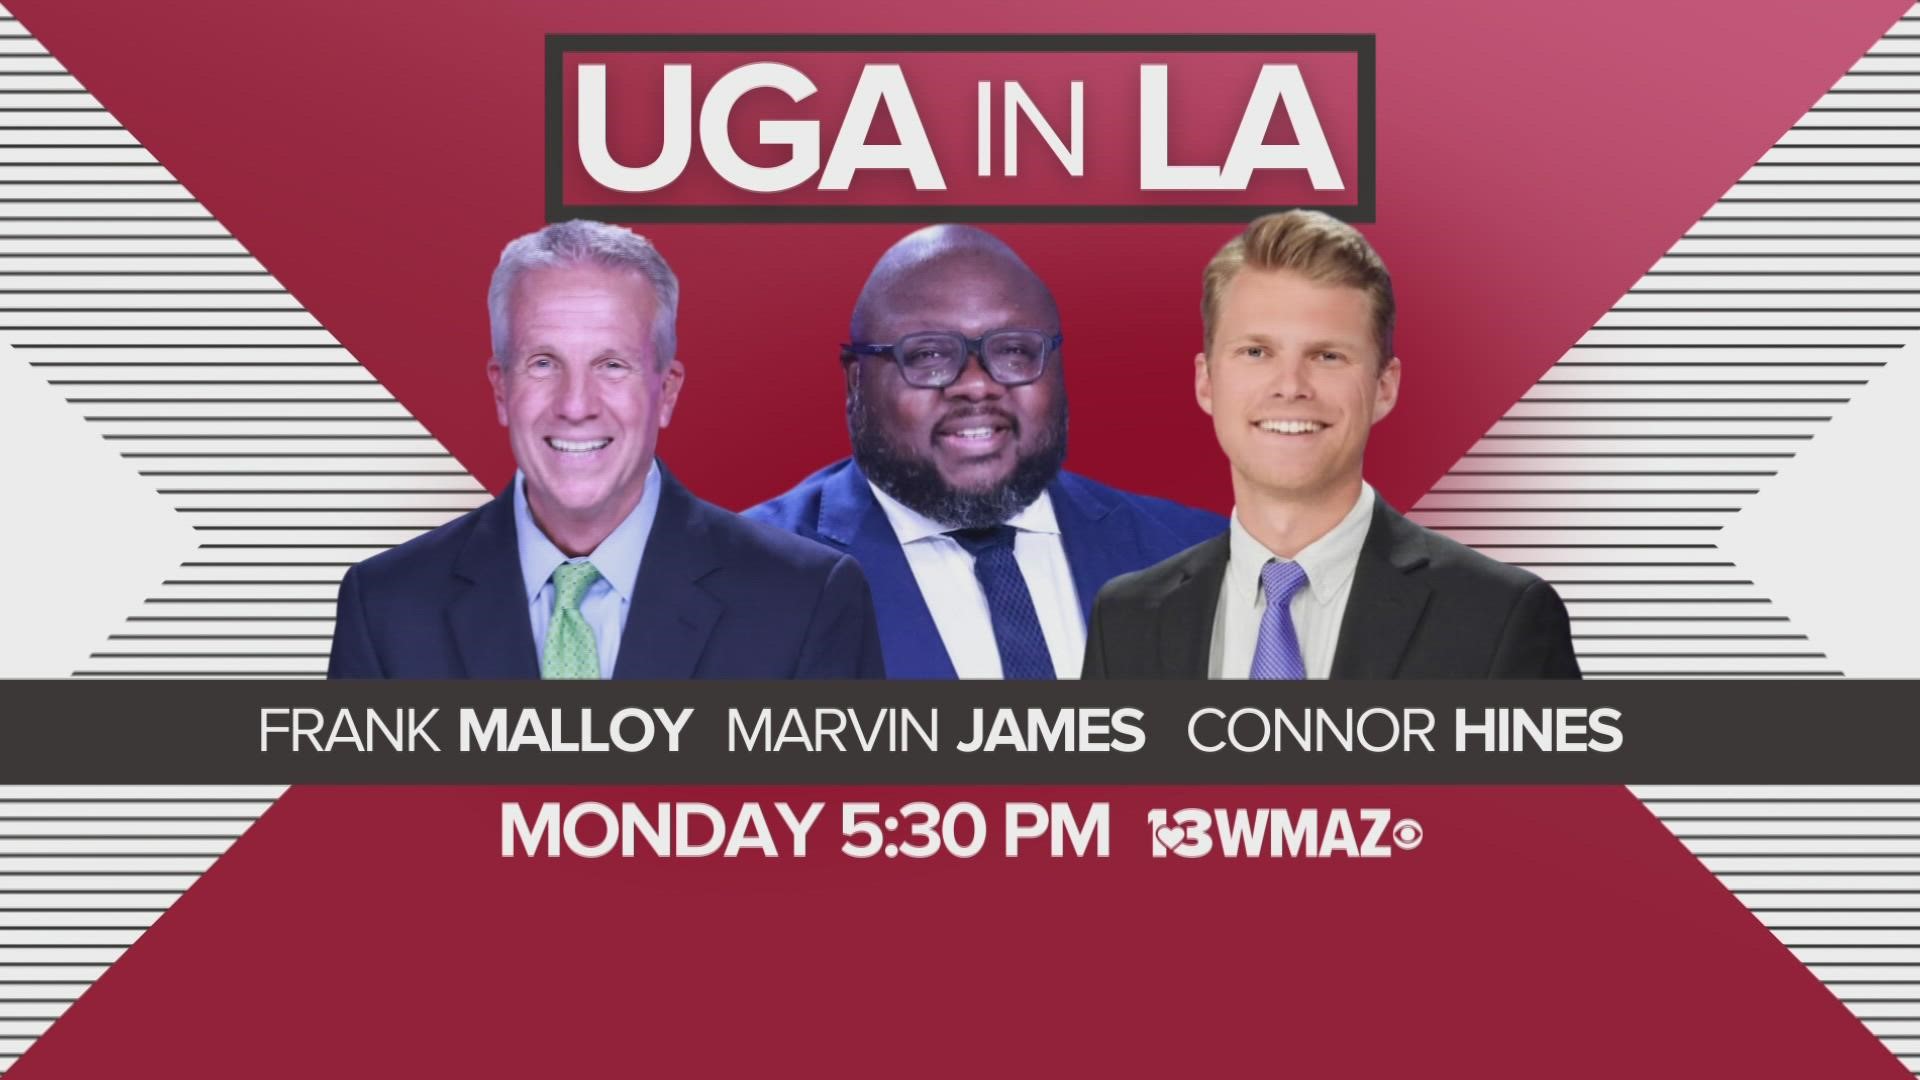 Join Connor Hines, Marvin James, and Frank Malloy for "UGA in LA" Monday at 5:30 p.m. on 13WMAZ!